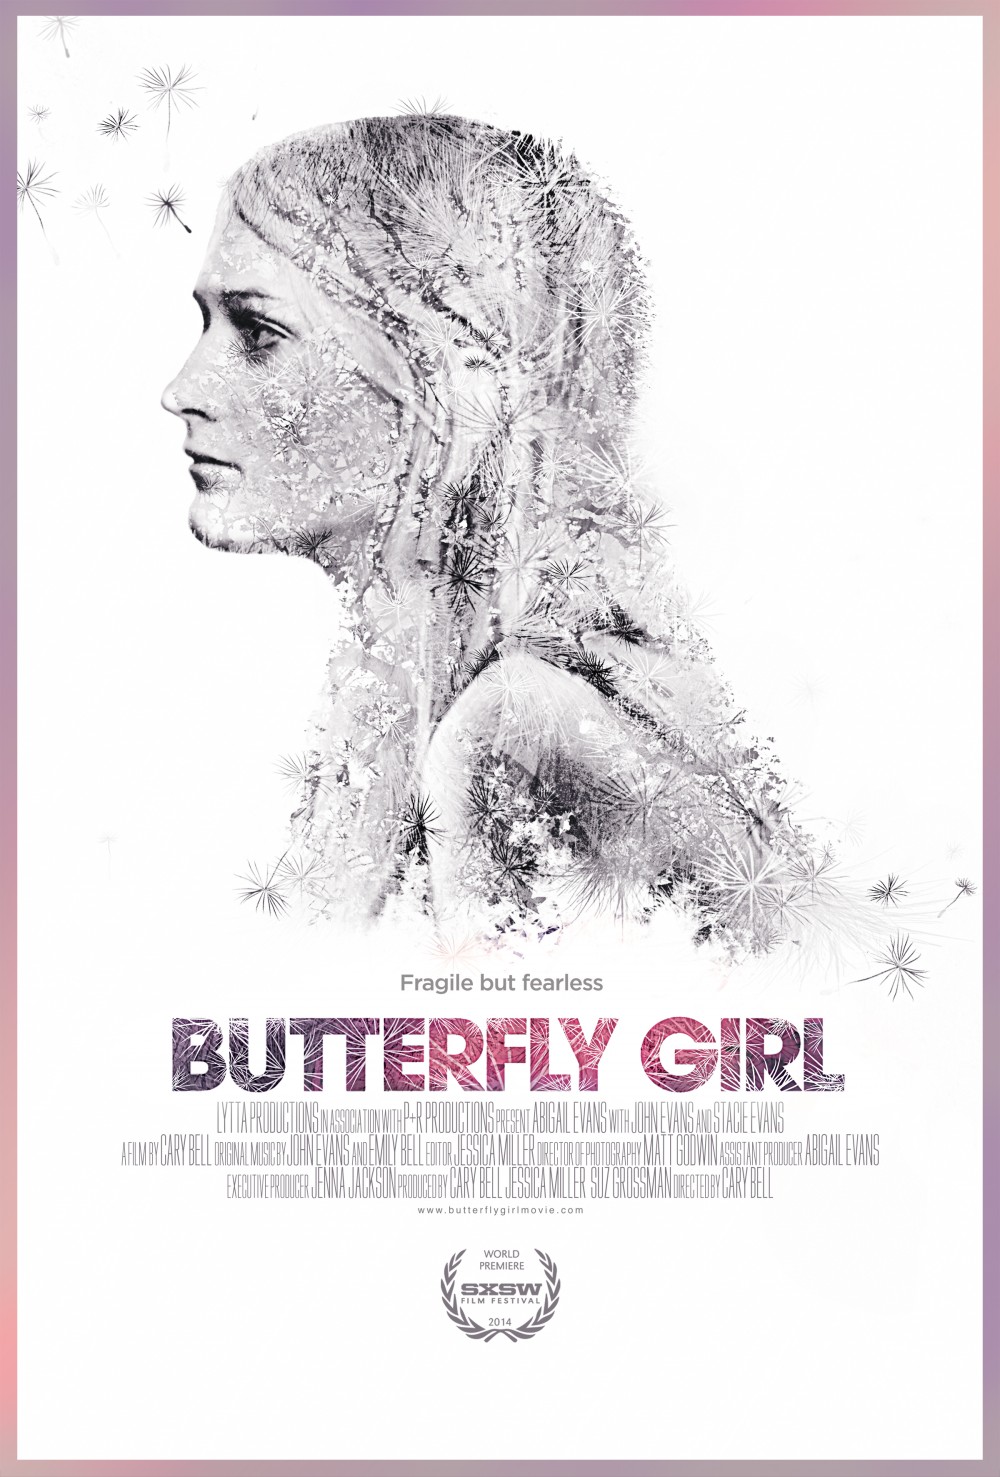 Photo credit: Butterfly Girl film